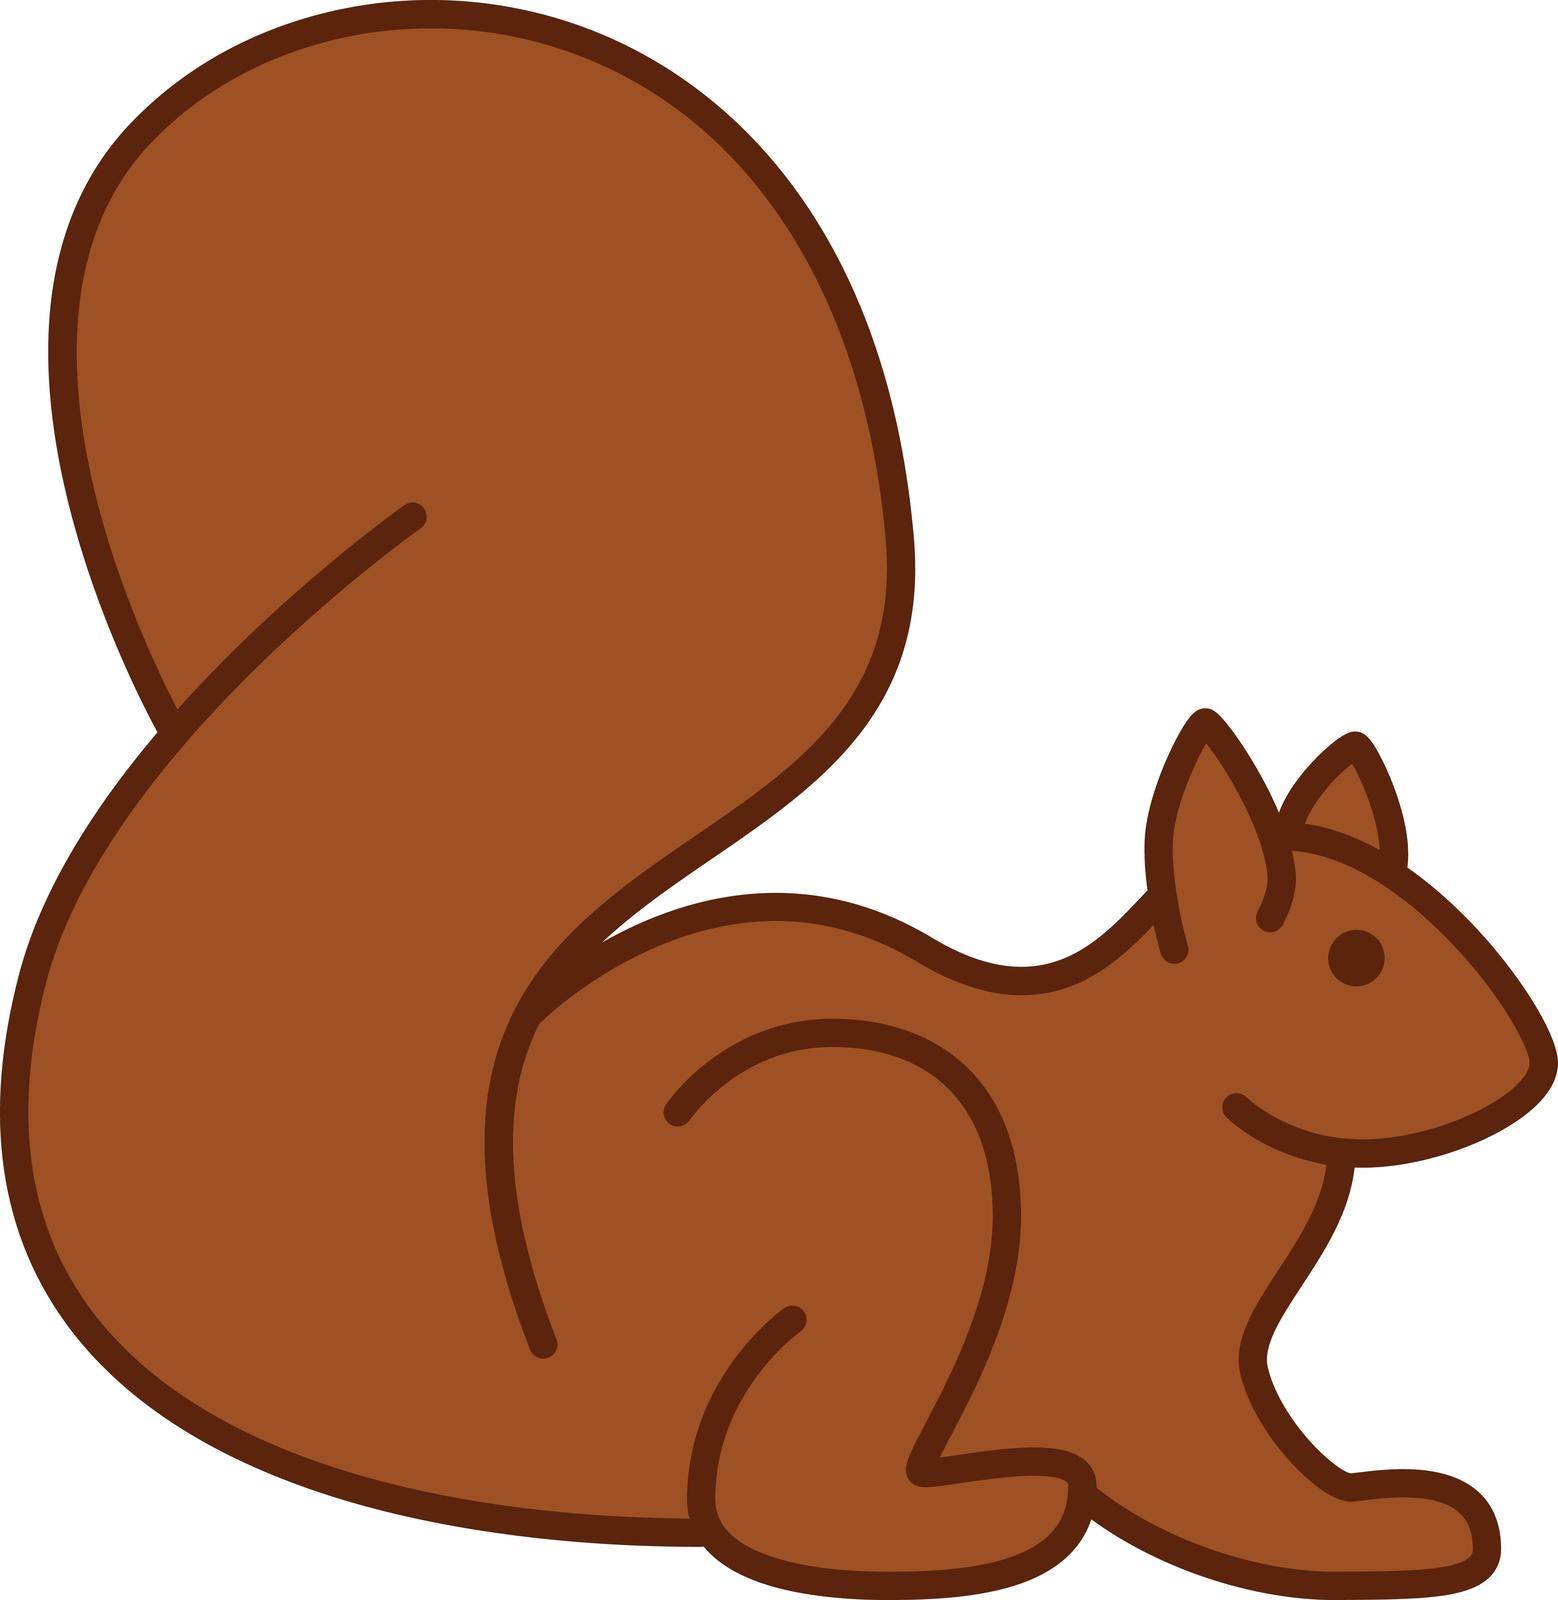 This vector image shows a squirrel in a filled outline icon design. It is isolated on a white background.